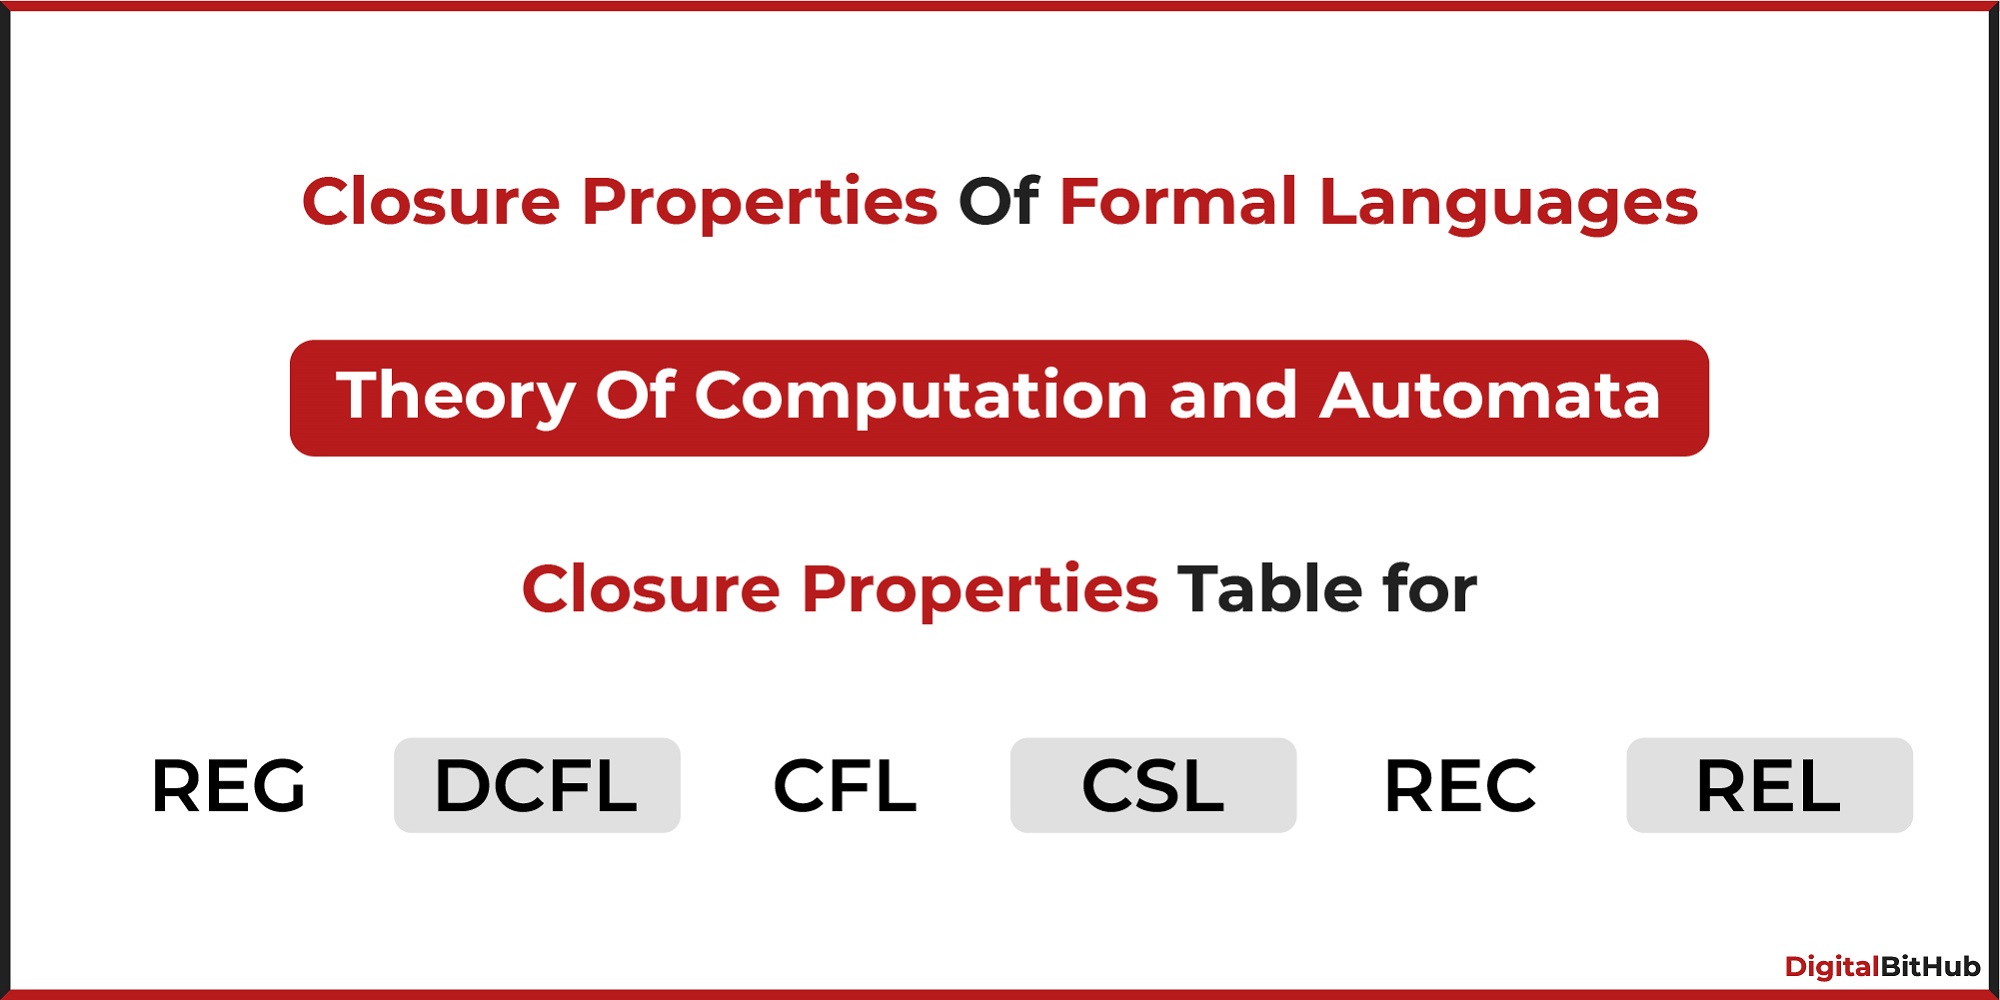 Closure Properties Table for Formal Languages